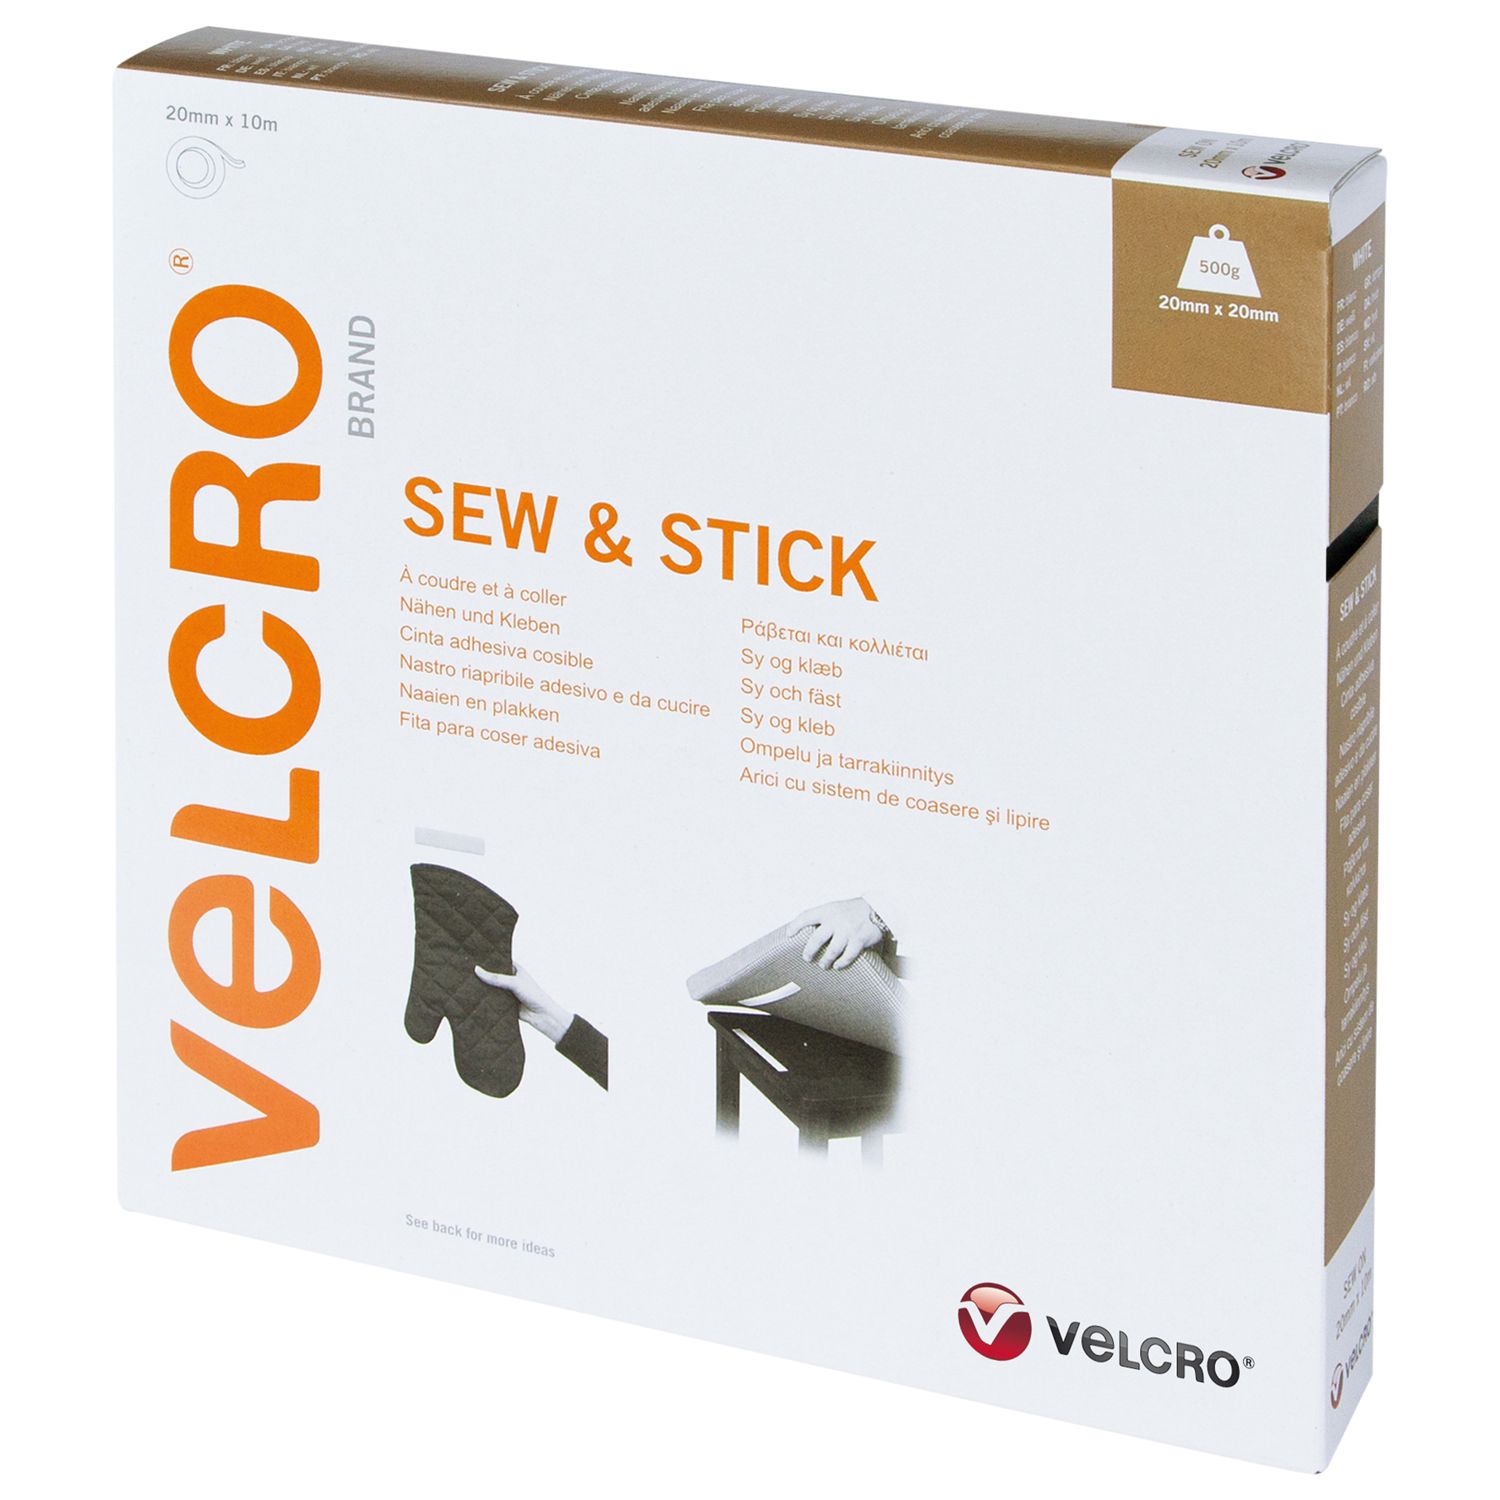 VELCRO® Brand Sew And Stick Tape for Fabric: 20mm